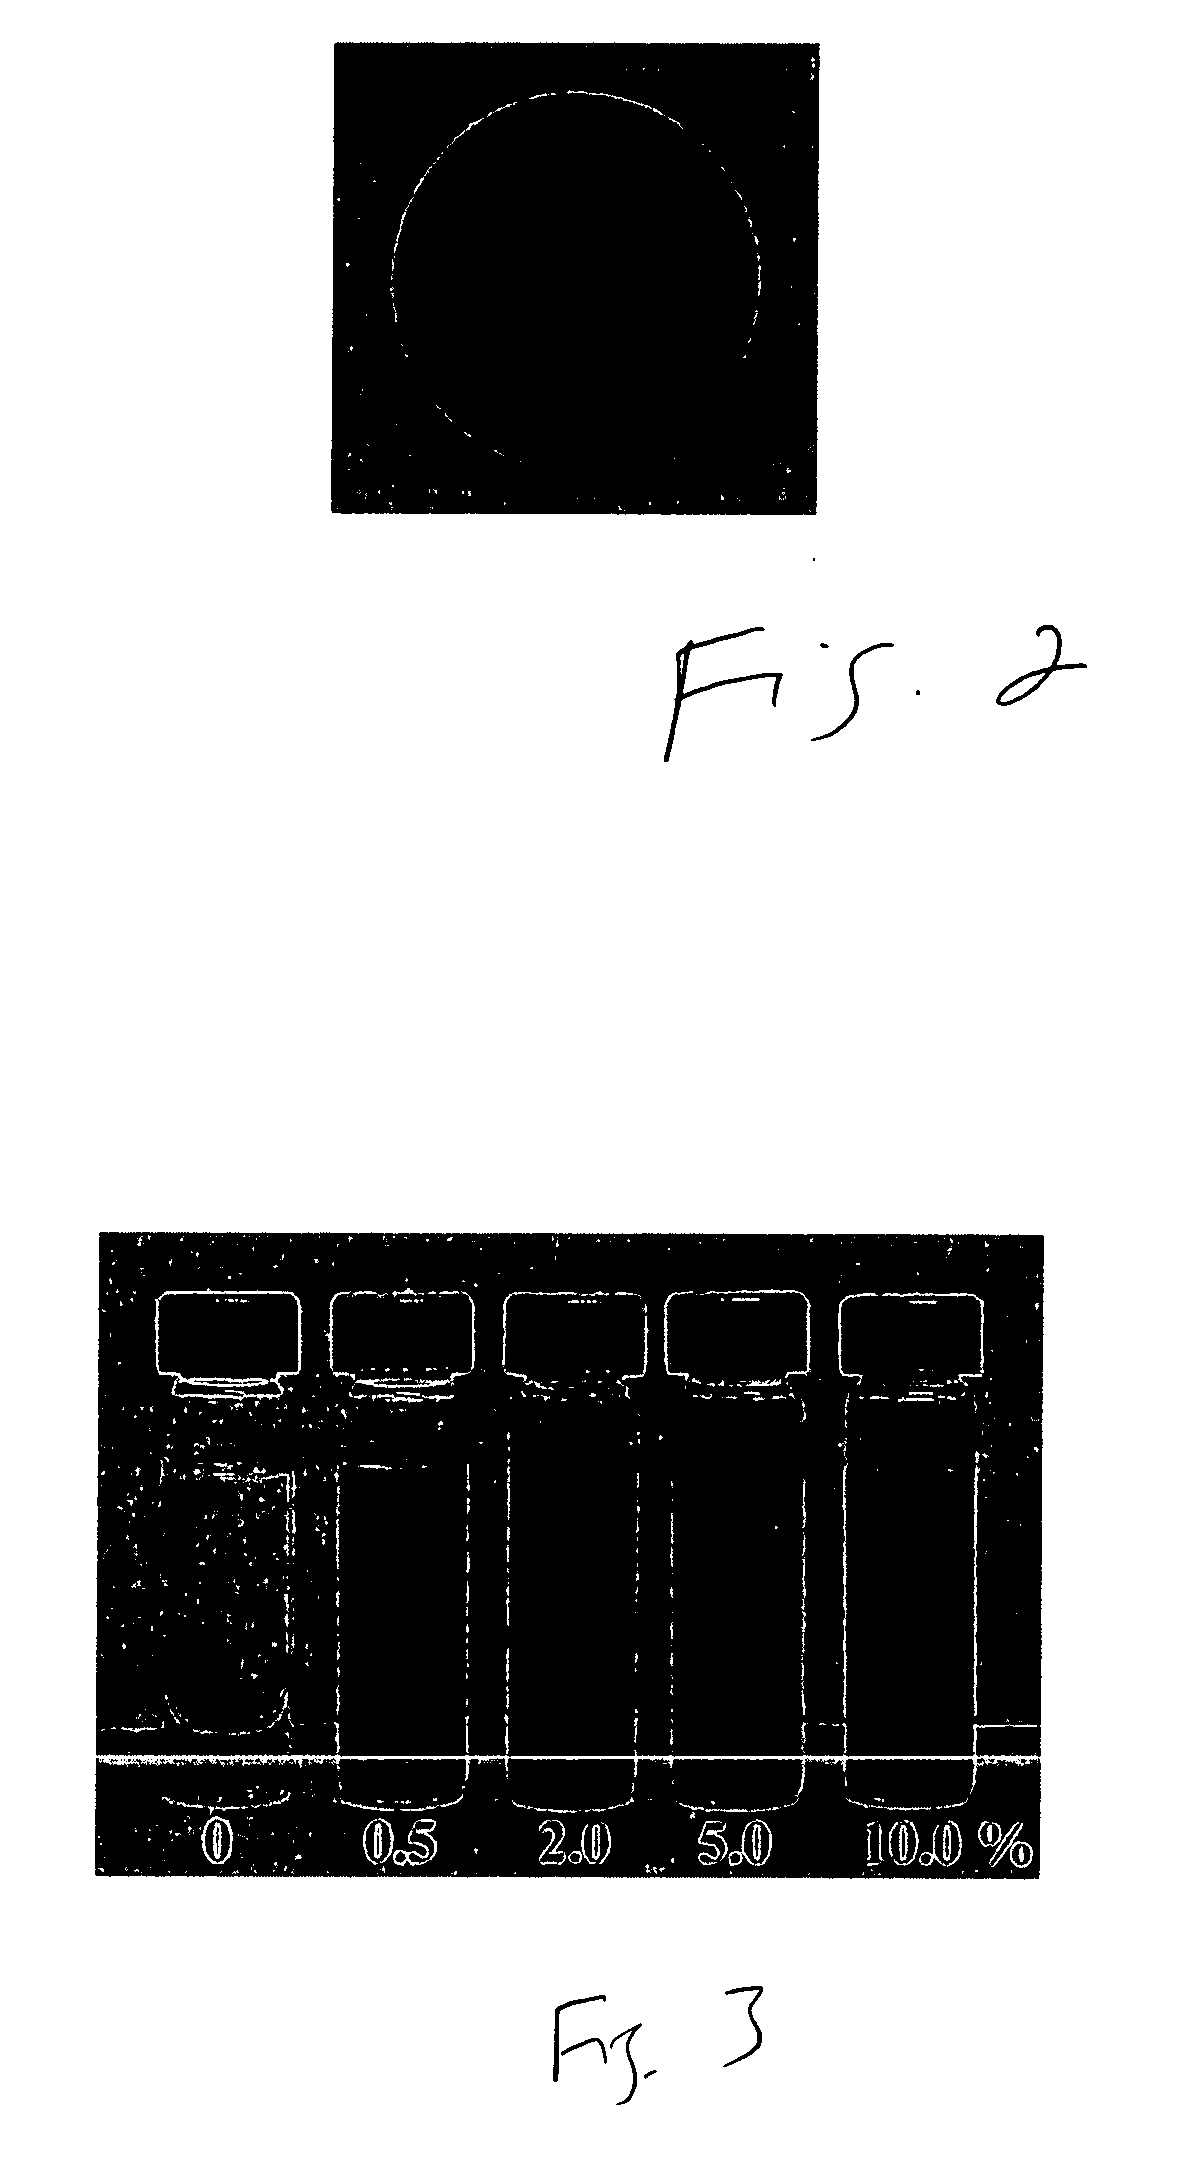 Conducting Nanotubes or Nanostructures Based Composites, Method of Making Them and Applications